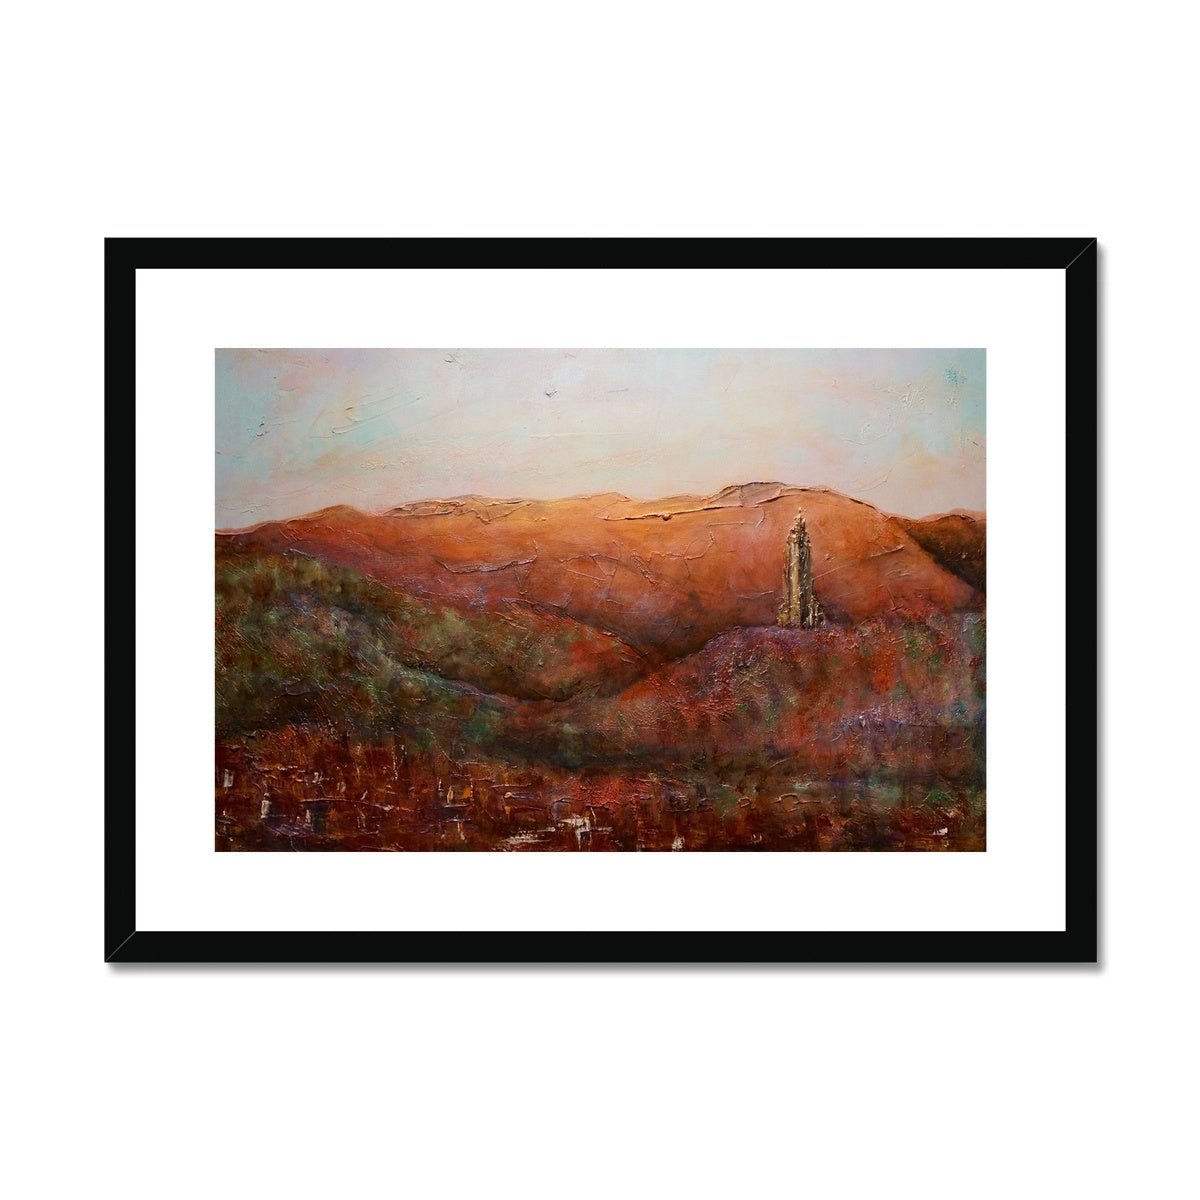 The Wallace Monument Painting | Framed & Mounted Prints From Scotland-Framed & Mounted Prints-Historic & Iconic Scotland Art Gallery-A2 Landscape-Black Frame-Paintings, Prints, Homeware, Art Gifts From Scotland By Scottish Artist Kevin Hunter